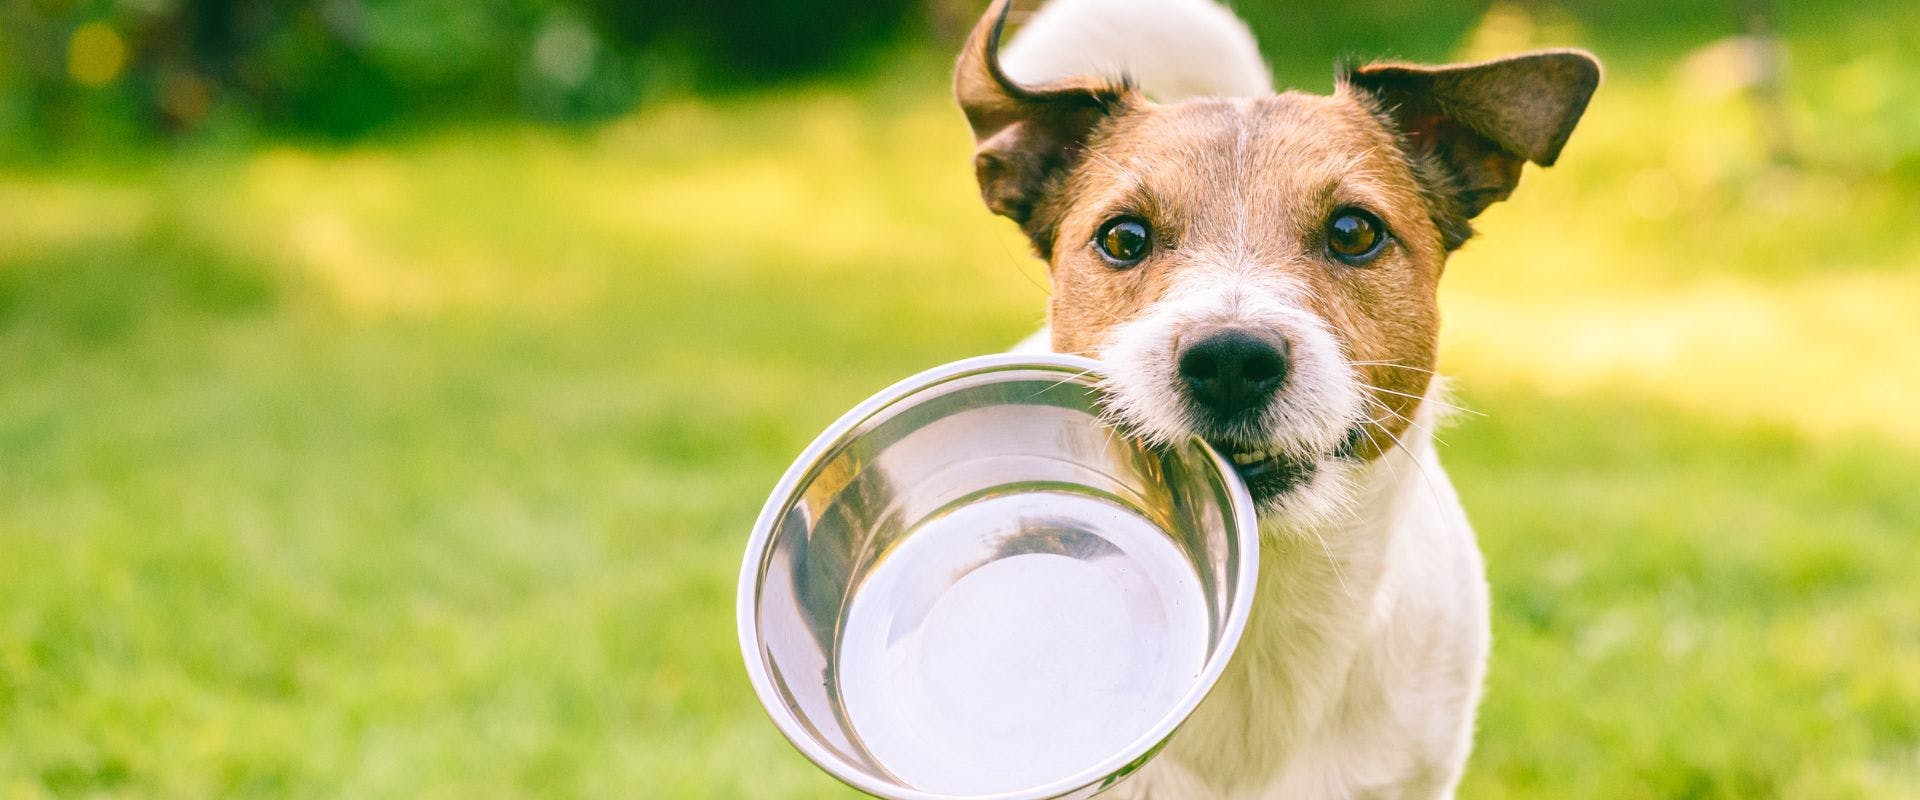 Jack Russell running with a metal bowl in their mouth